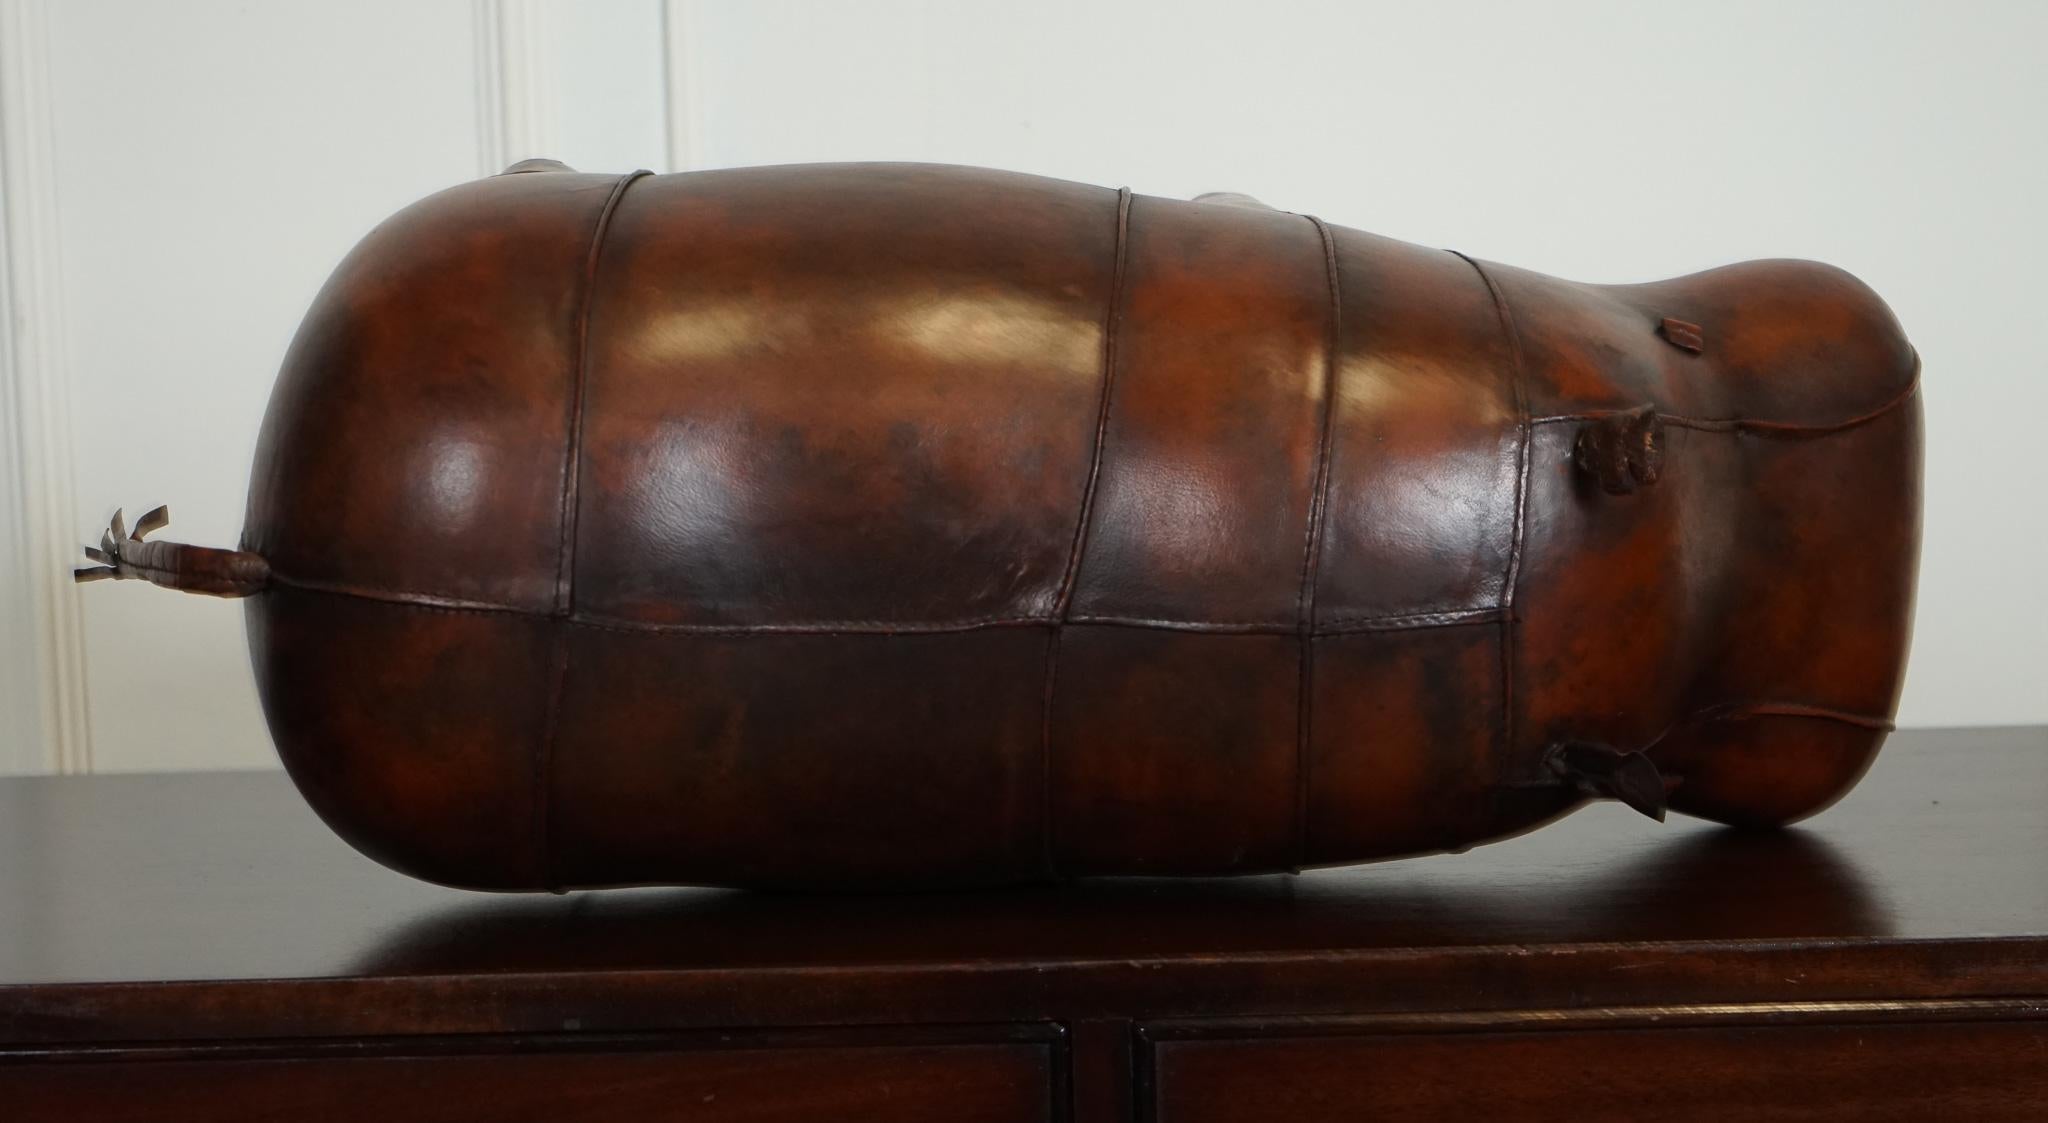 LIBERTY LONDON STYLE OMERSA ANTIQUE BROWN LEATHER FOOTSTOOL HiPPO For Sale 1